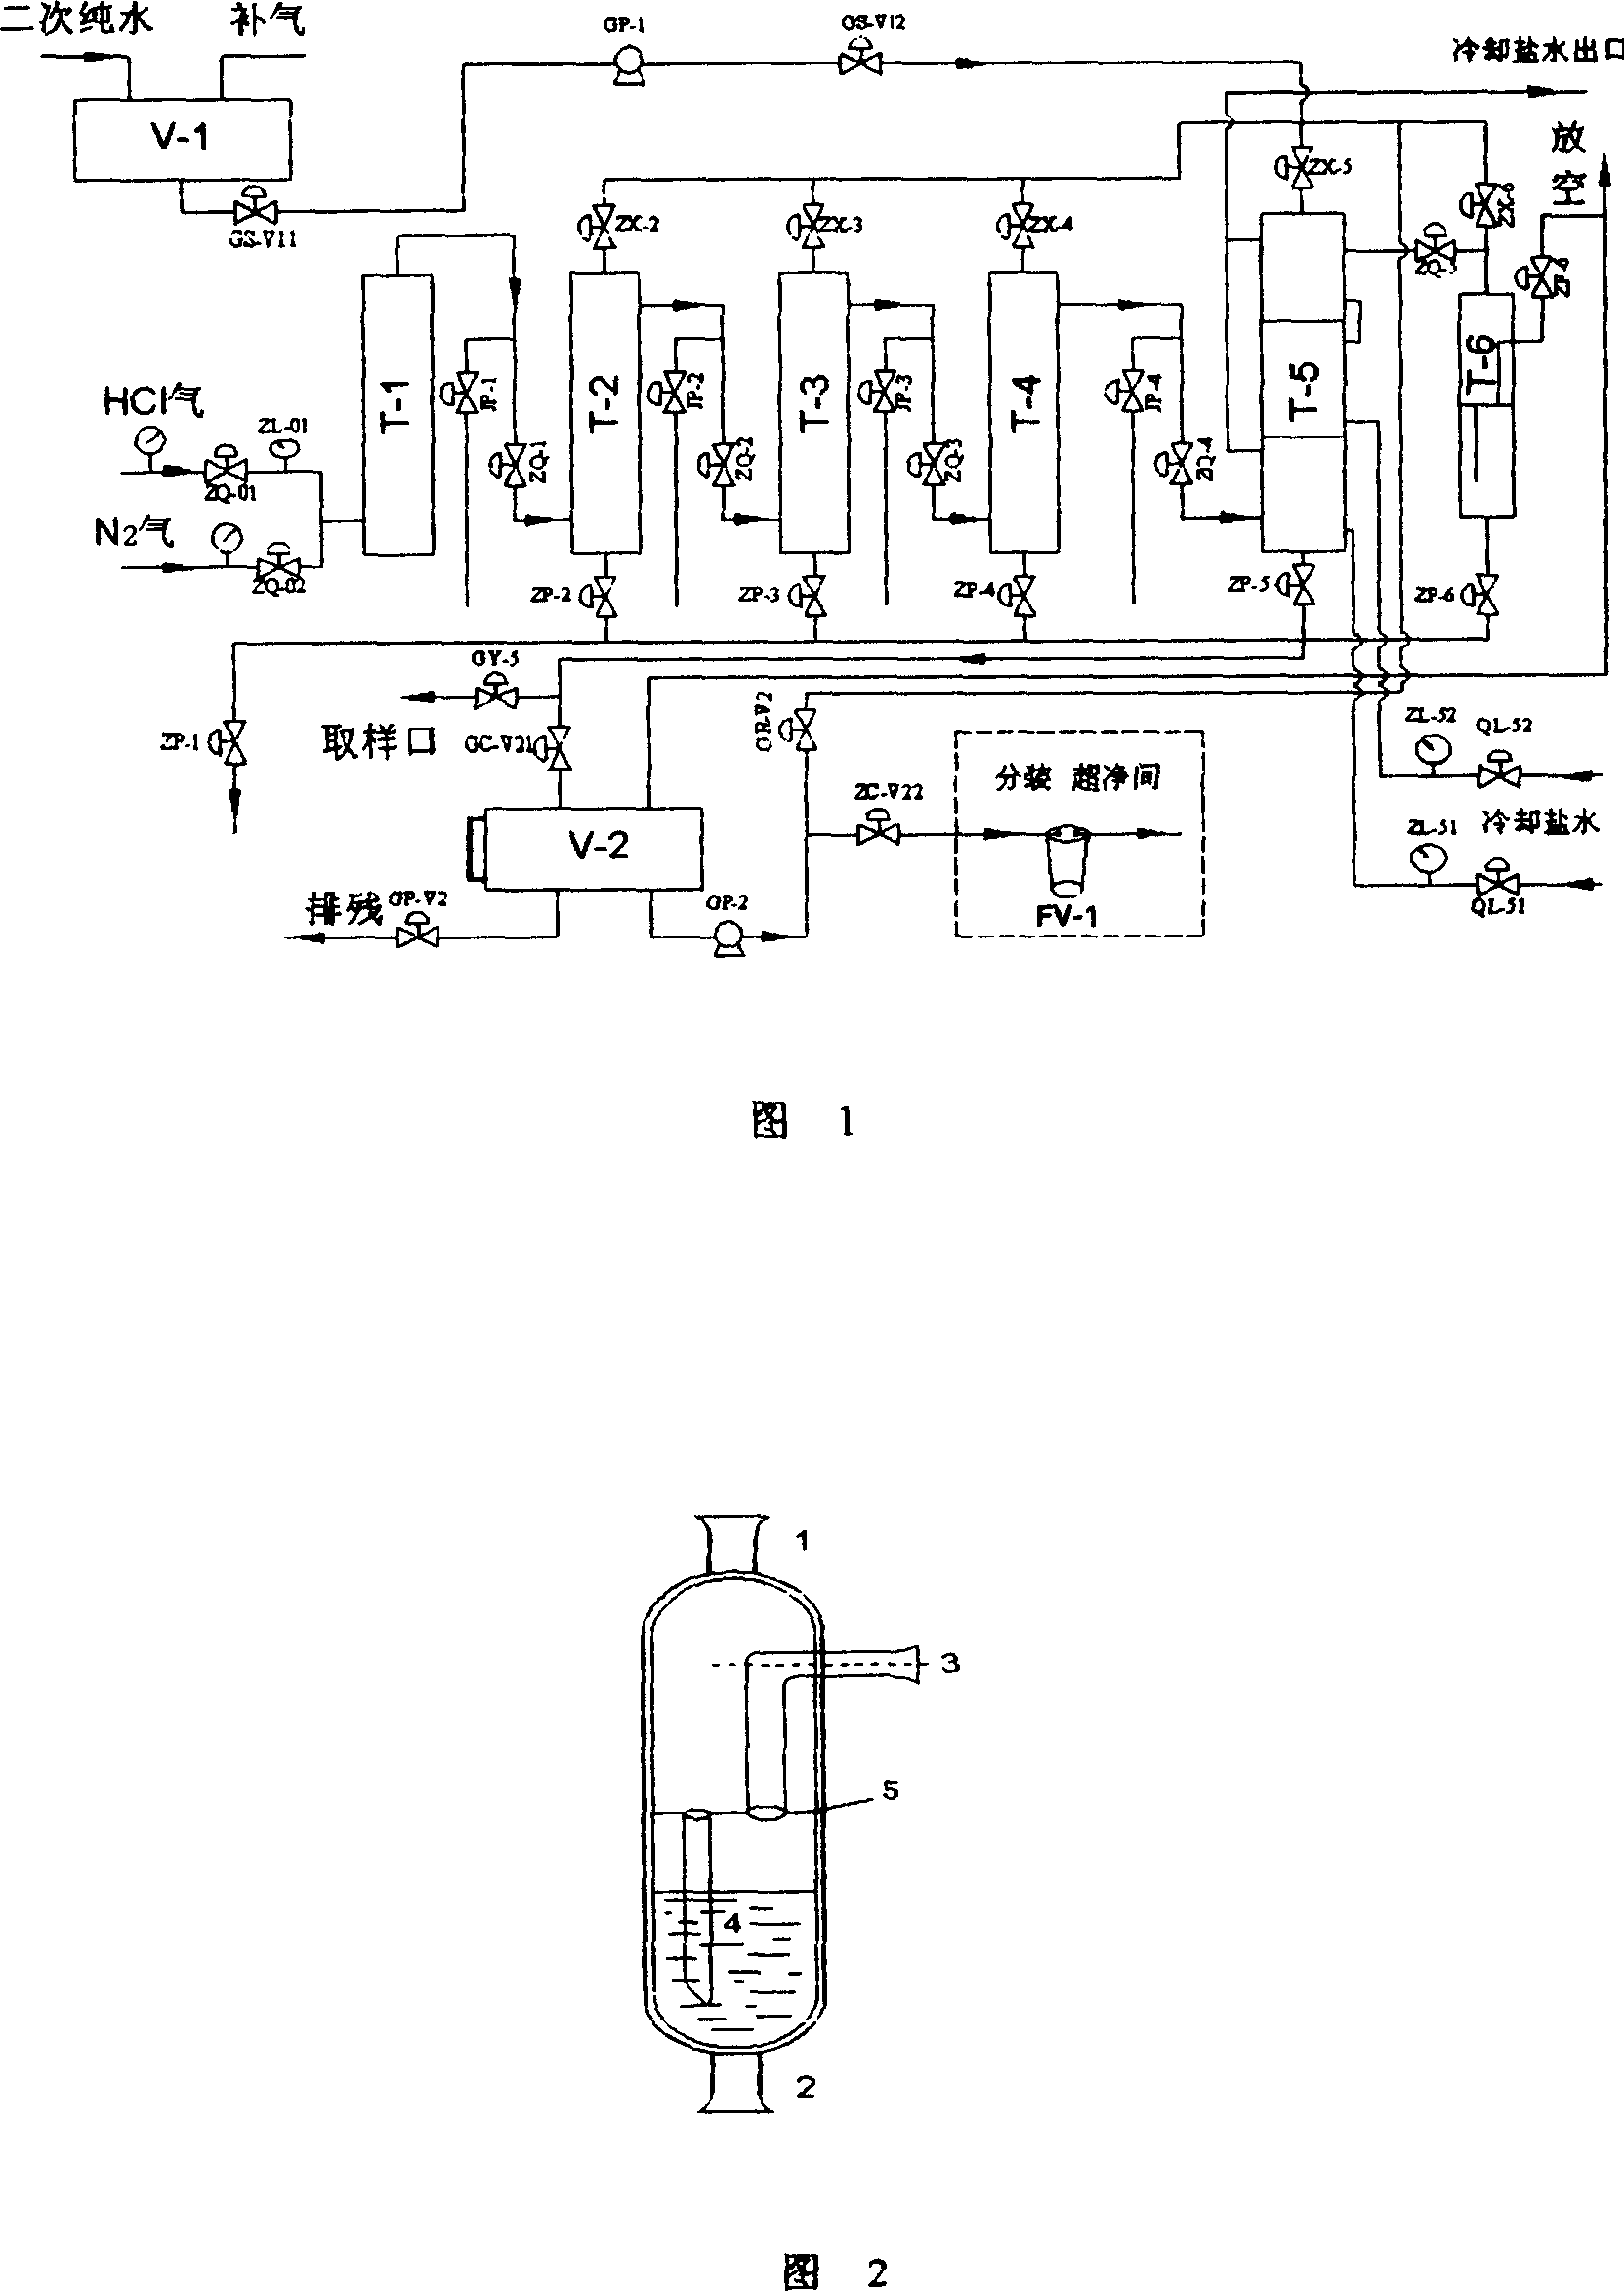 Apparatus and process of producing electronics level high purity hydrochloric acid